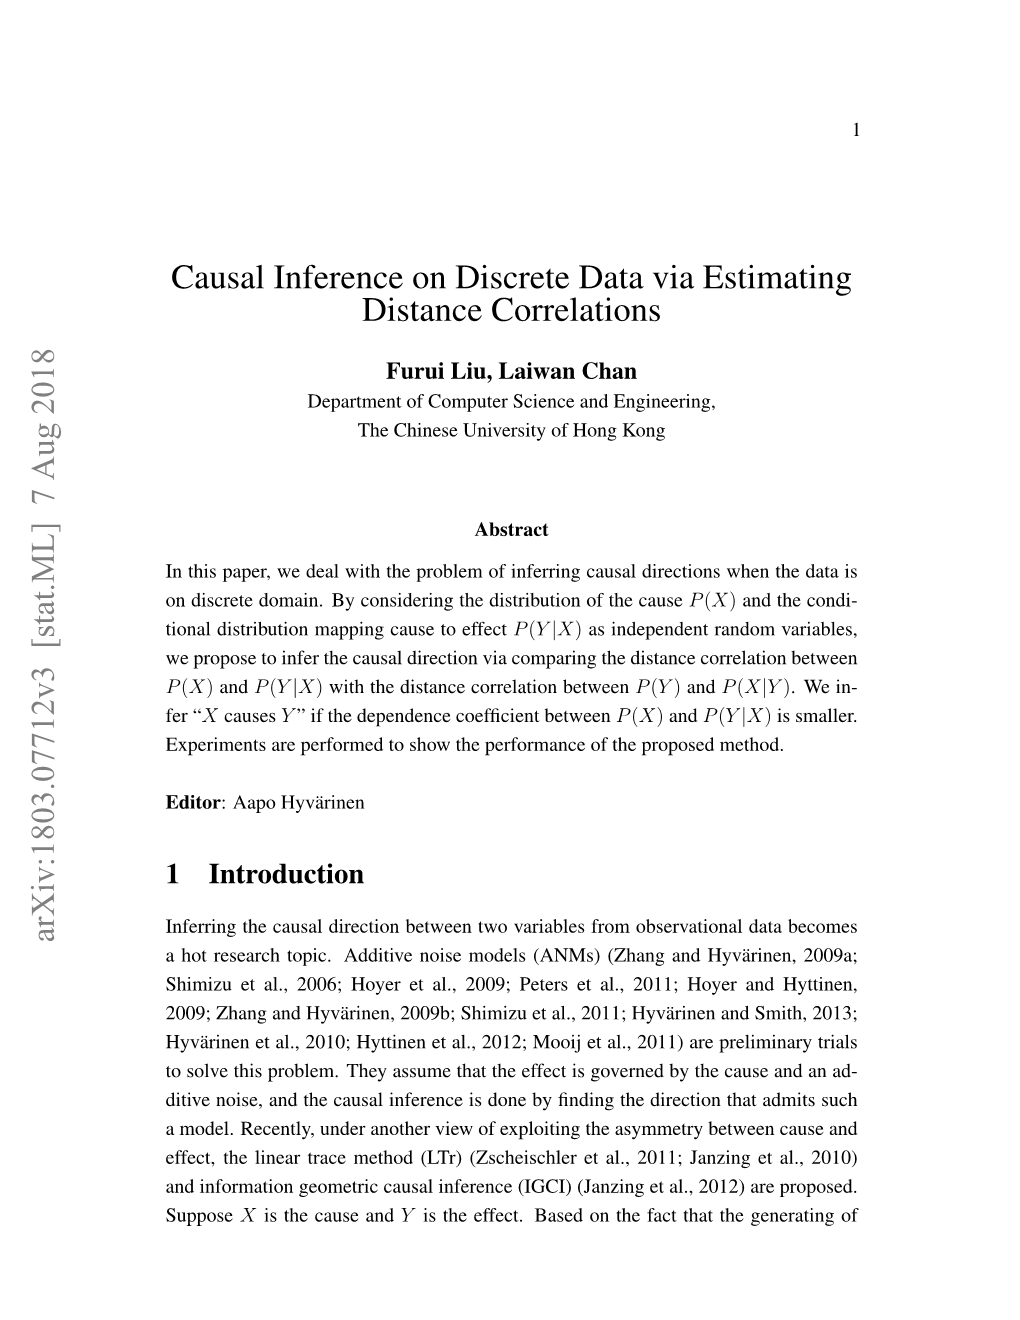 Causal Inference on Discrete Data Via Estimating Distance Correlations